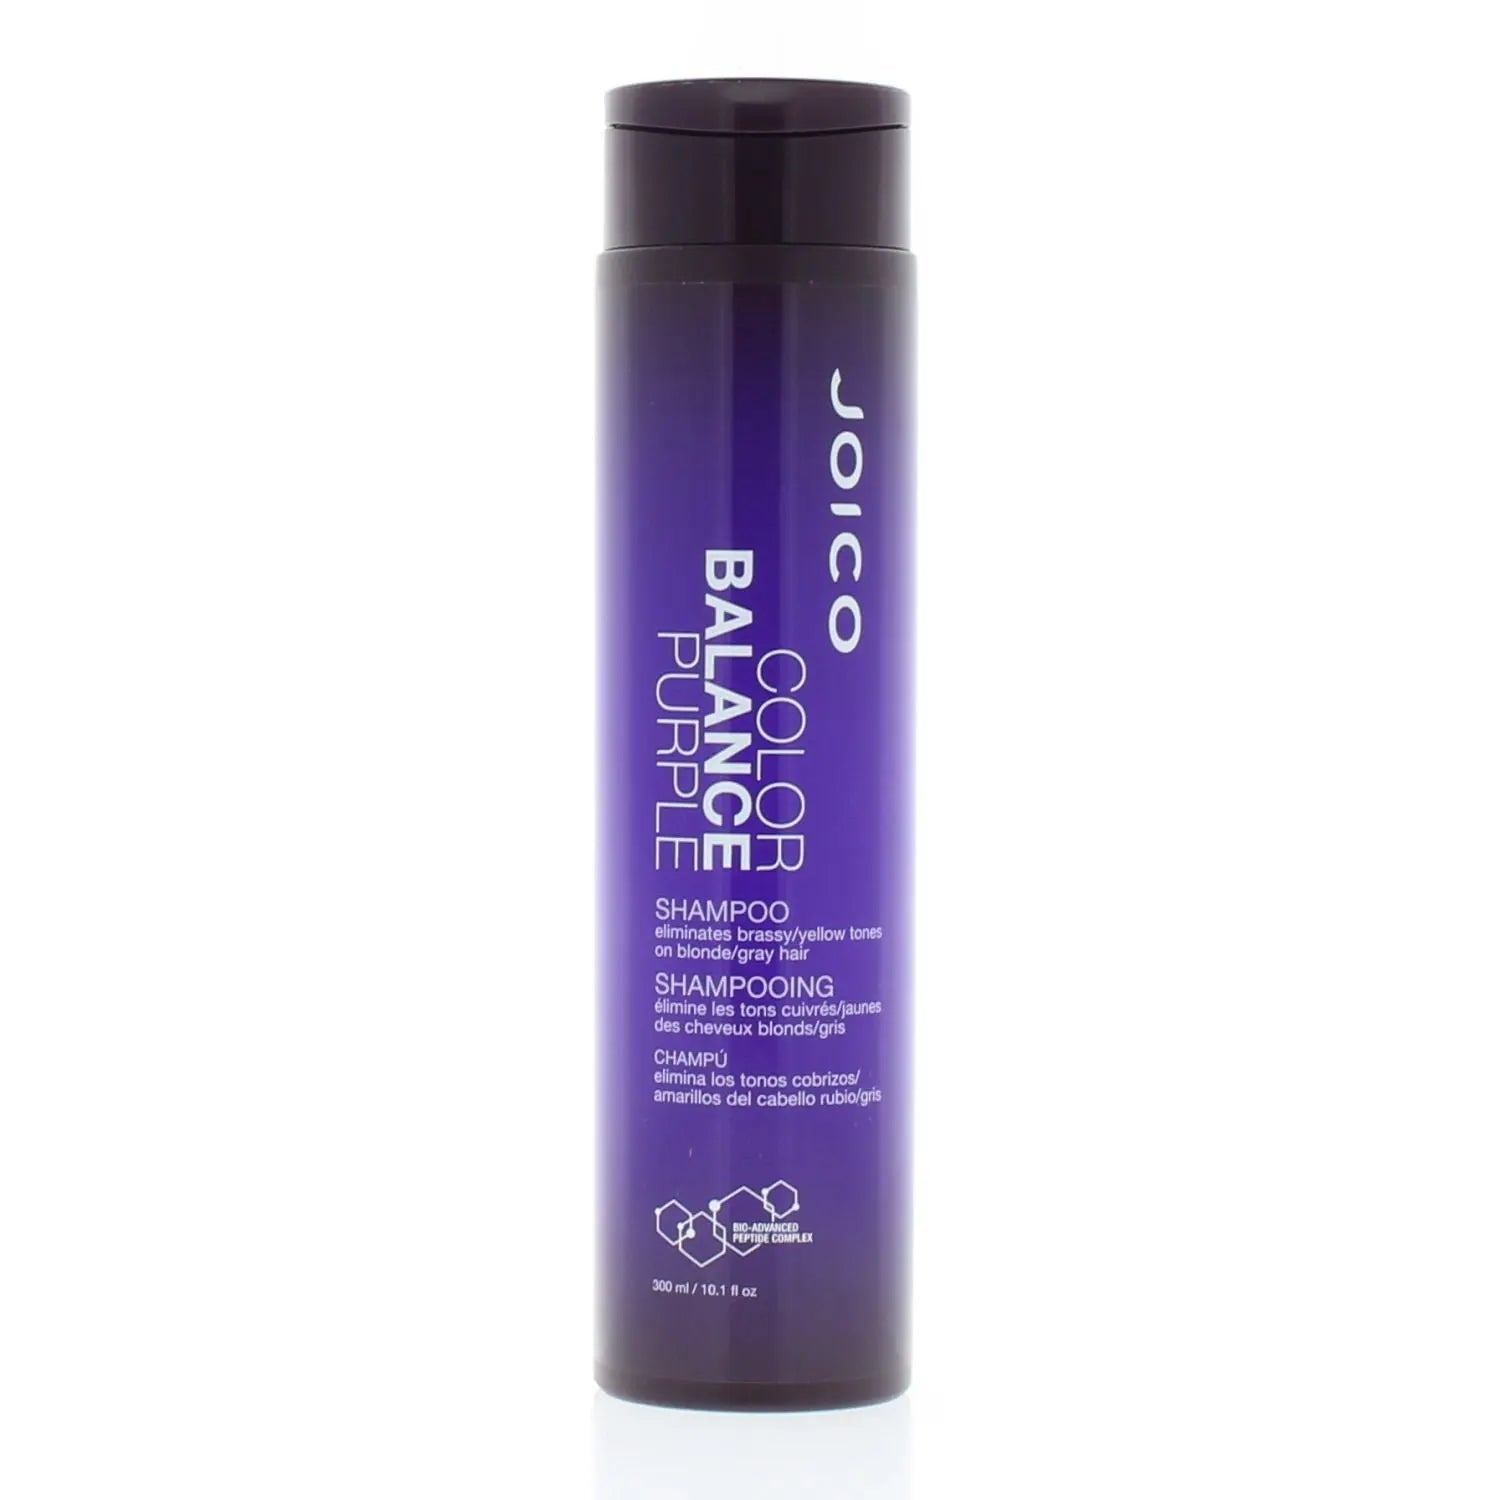 Joico Color Balance Purple Shampoo & Conditioner Set, Eliminate Brassy and  Yellow tones, for Cool Blonde or Gray Hair